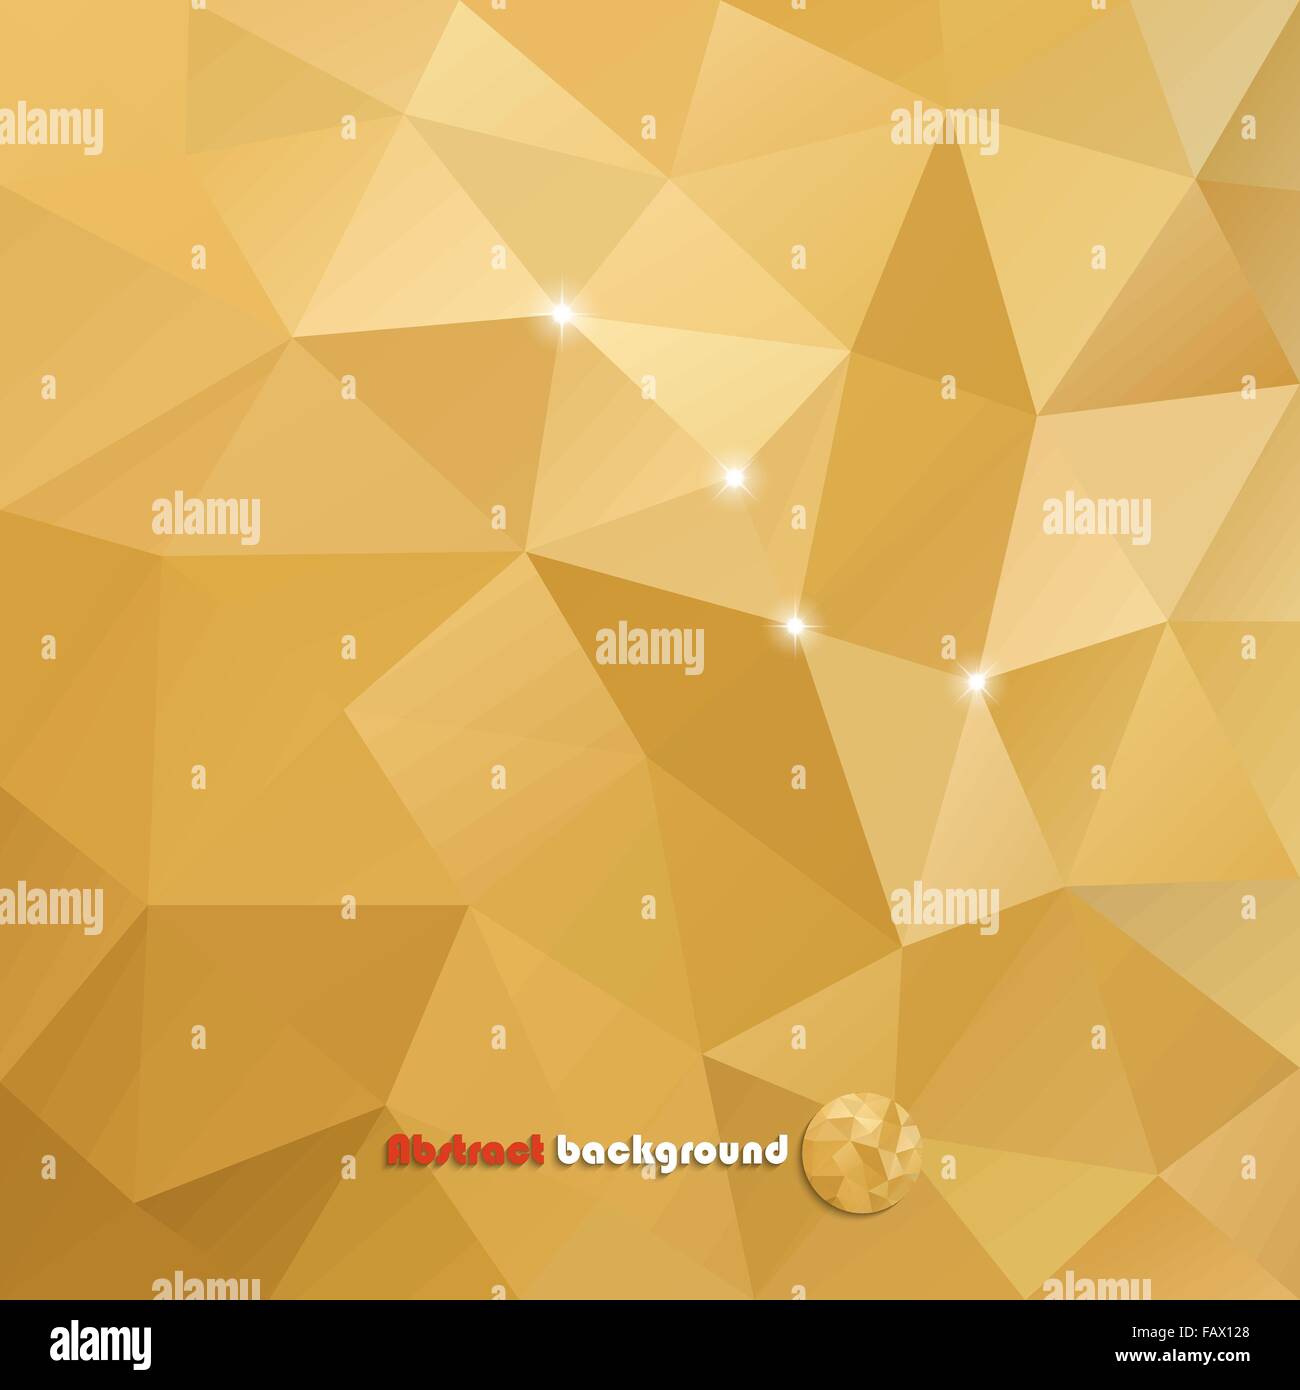 Abstract golden polygonal background for your design Stock Vector